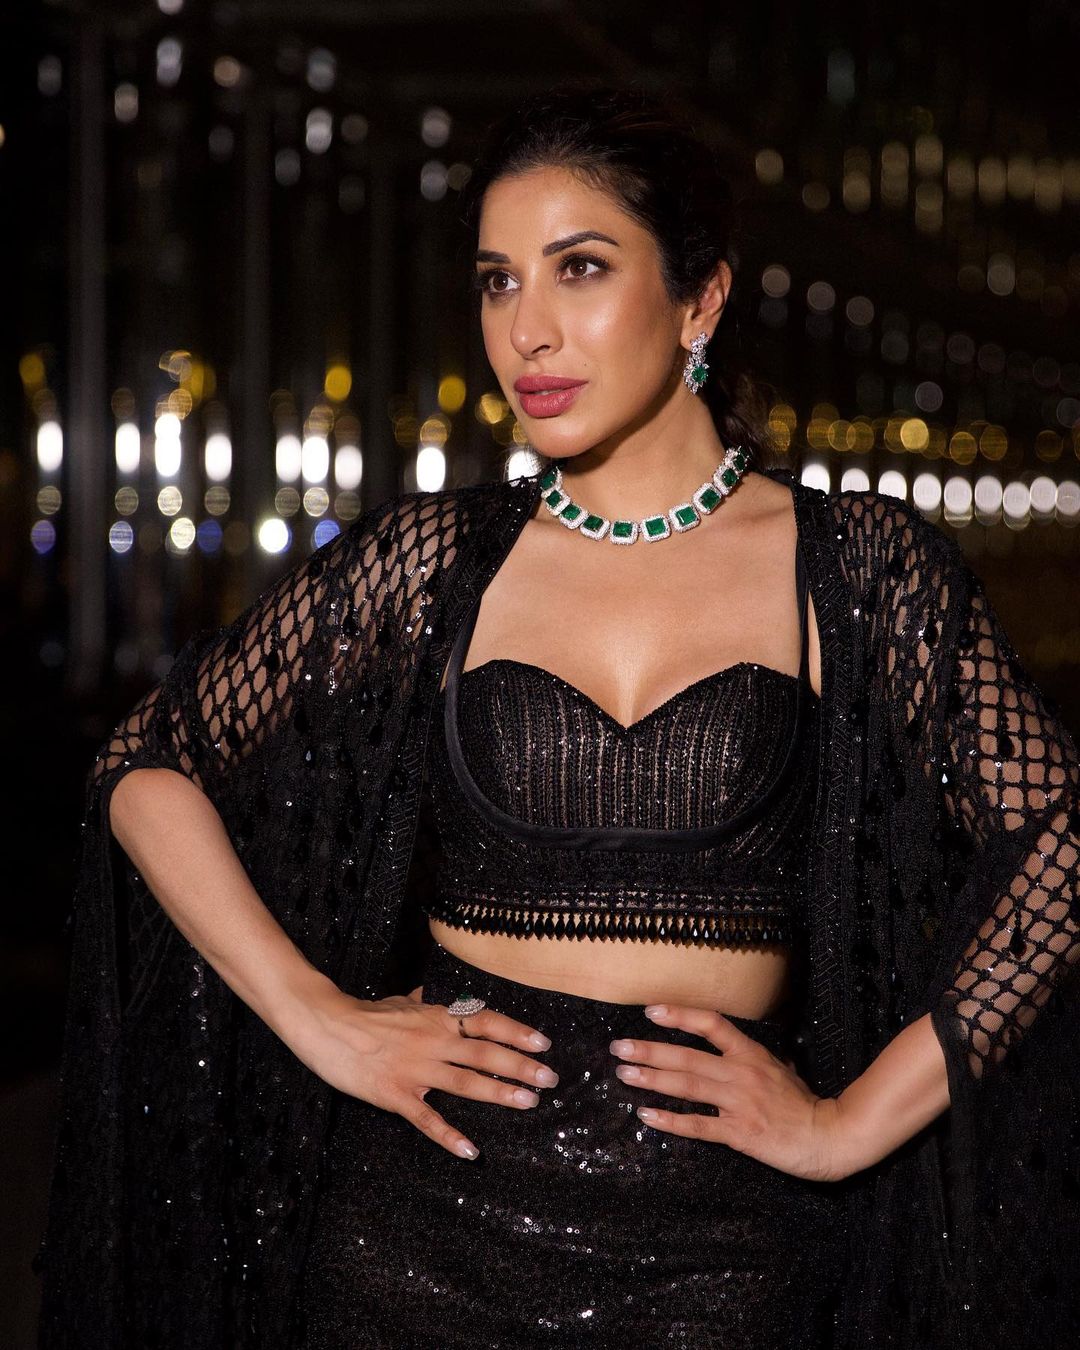 Sophie Choudry looks glorious in the sequinned black outfit